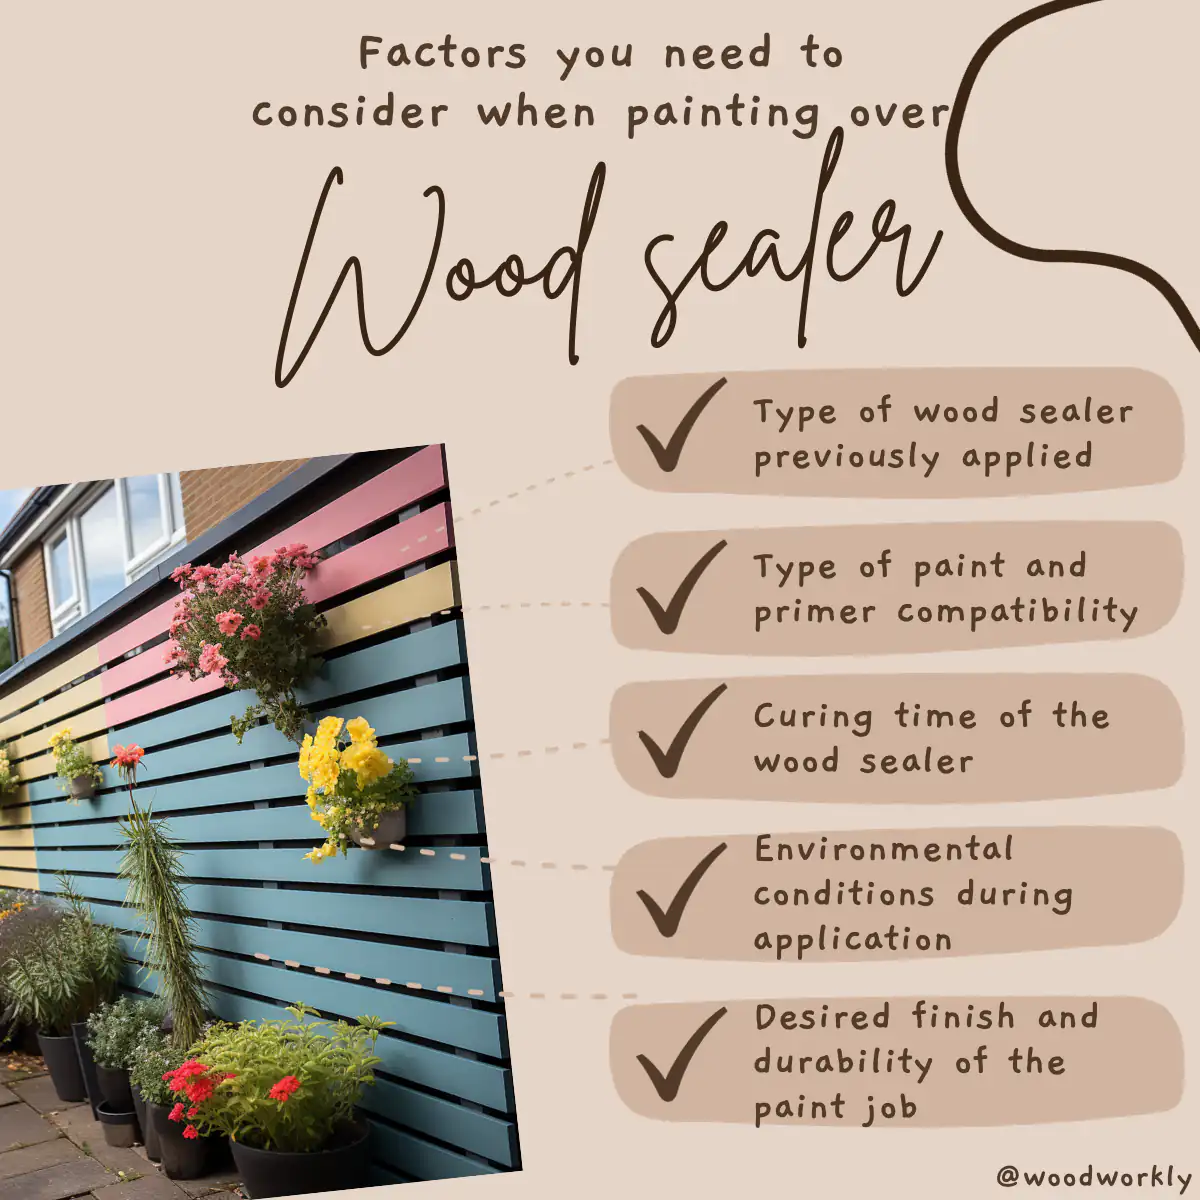 Factors you need to consider when painting over wood sealer